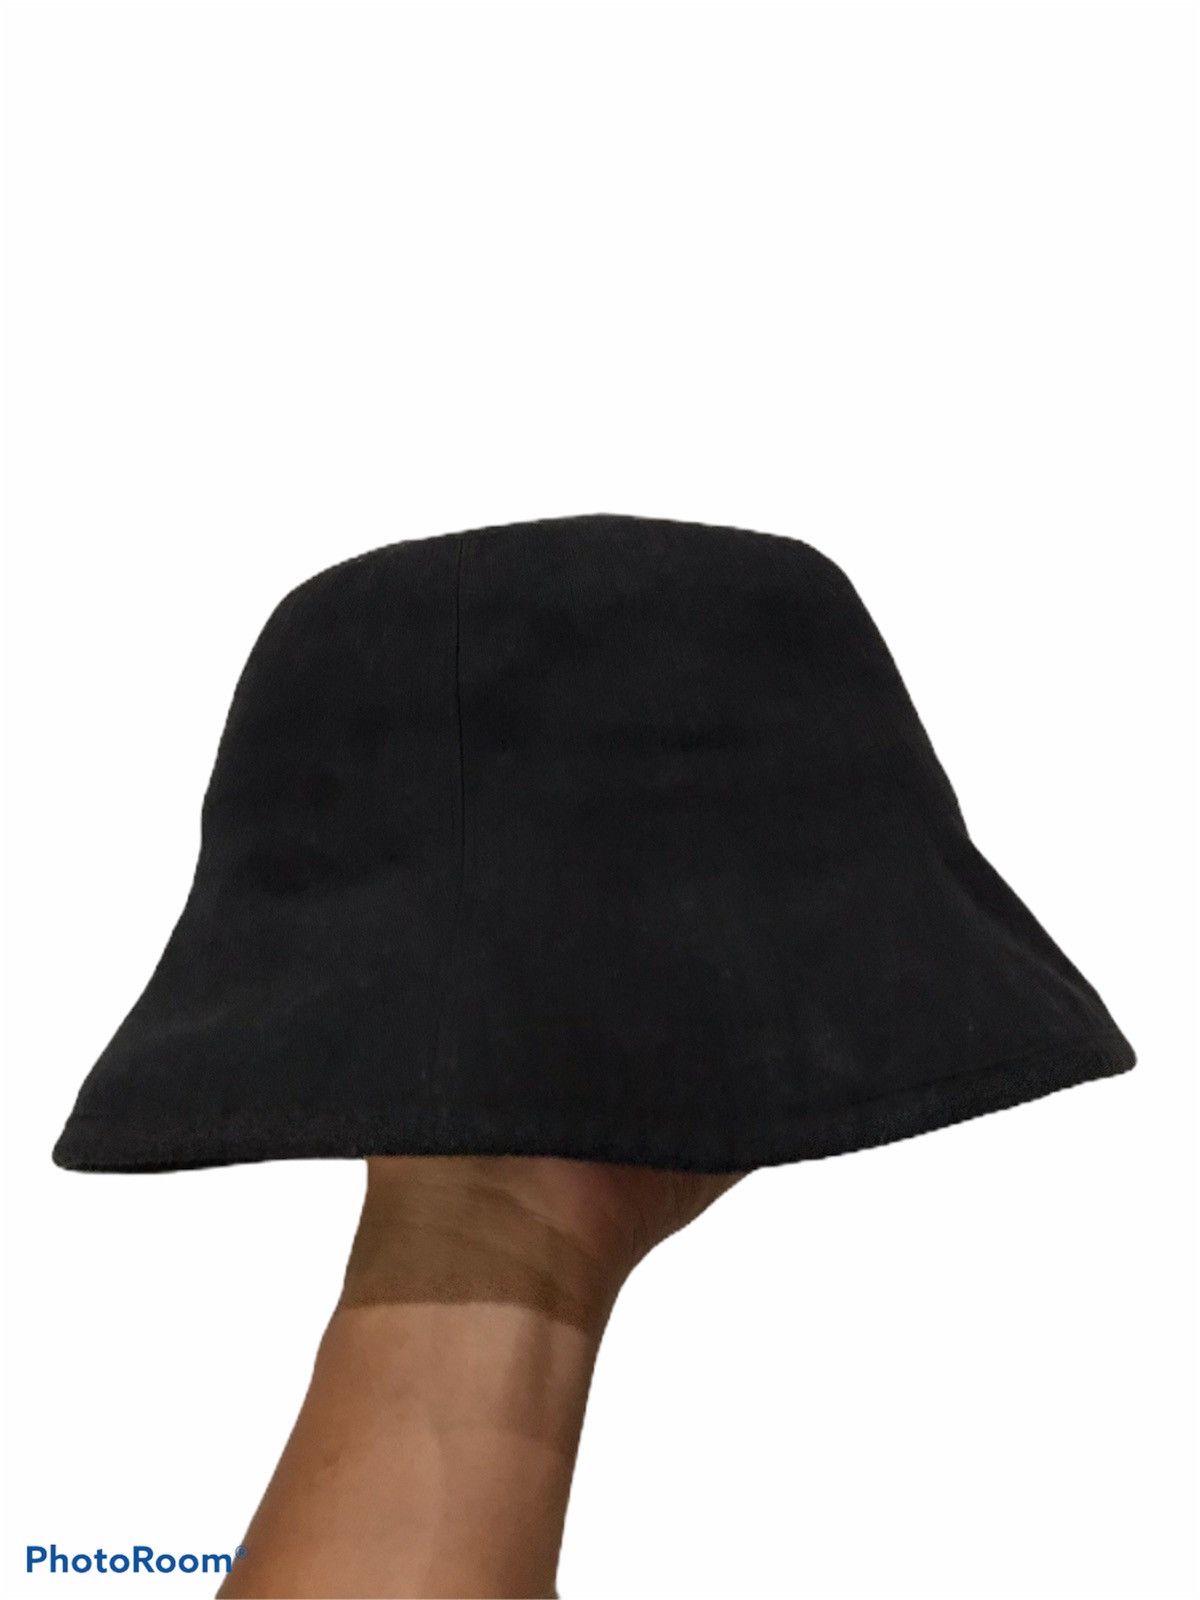 Vintage Vintage Anna Sui bucket Hat Size ONE SIZE - 1 Preview